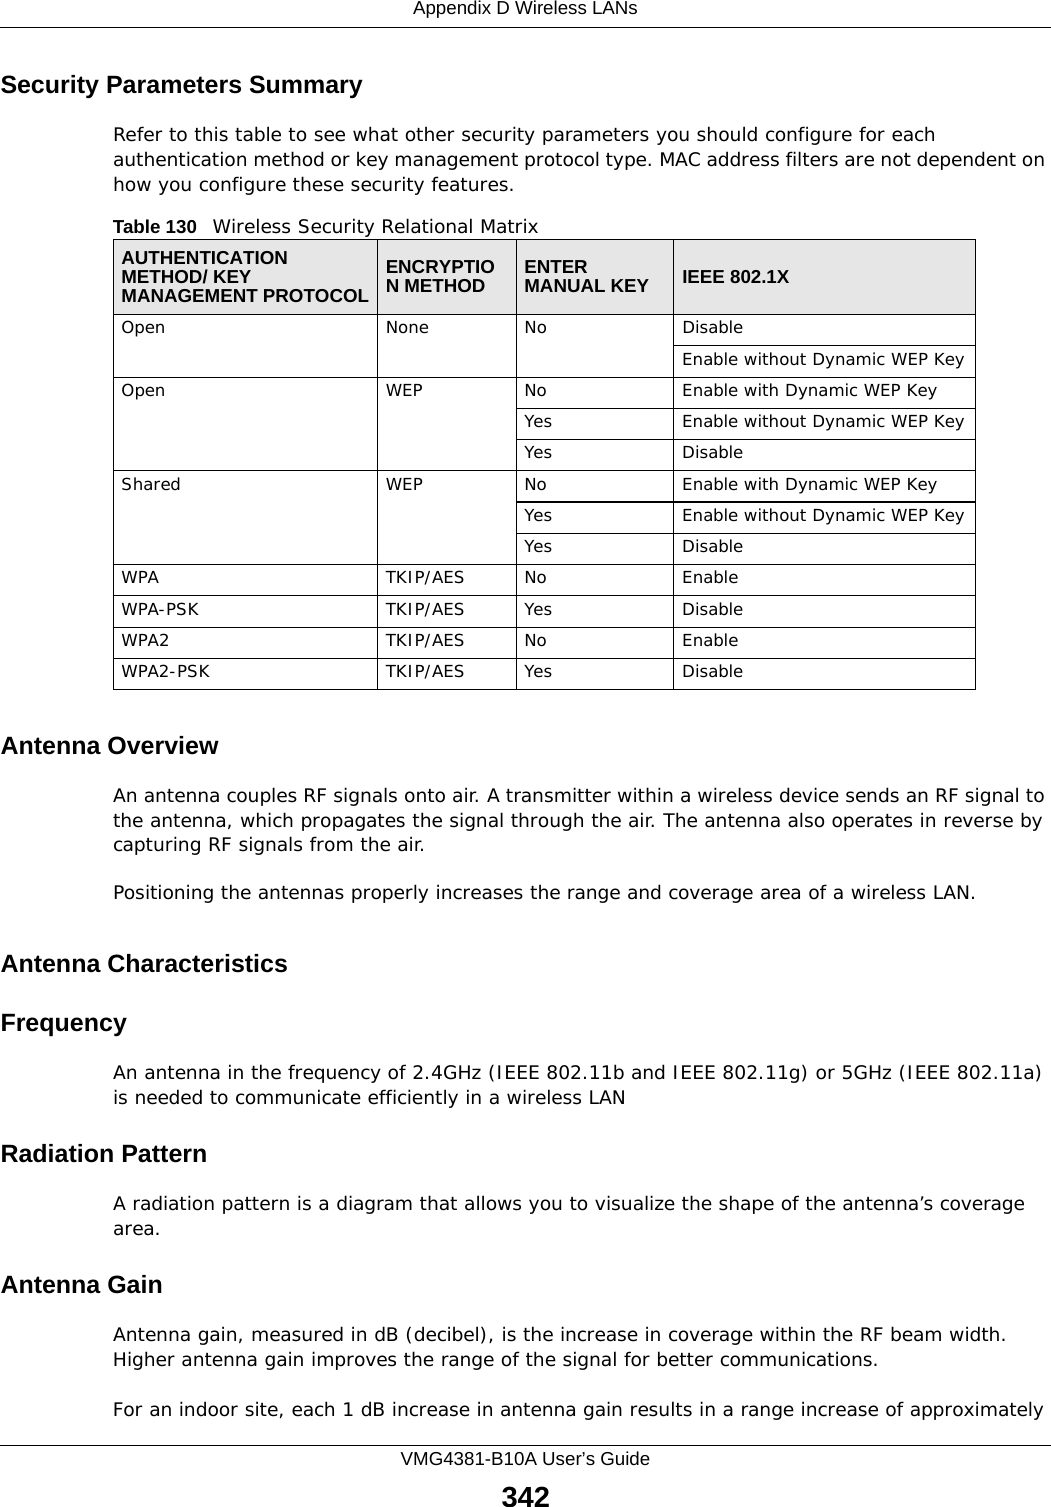 Appendix D Wireless LANsVMG4381-B10A User’s Guide342Security Parameters SummaryRefer to this table to see what other security parameters you should configure for each authentication method or key management protocol type. MAC address filters are not dependent on how you configure these security features.Antenna OverviewAn antenna couples RF signals onto air. A transmitter within a wireless device sends an RF signal to the antenna, which propagates the signal through the air. The antenna also operates in reverse by capturing RF signals from the air. Positioning the antennas properly increases the range and coverage area of a wireless LAN. Antenna CharacteristicsFrequencyAn antenna in the frequency of 2.4GHz (IEEE 802.11b and IEEE 802.11g) or 5GHz (IEEE 802.11a) is needed to communicate efficiently in a wireless LANRadiation PatternA radiation pattern is a diagram that allows you to visualize the shape of the antenna’s coverage area. Antenna GainAntenna gain, measured in dB (decibel), is the increase in coverage within the RF beam width. Higher antenna gain improves the range of the signal for better communications. For an indoor site, each 1 dB increase in antenna gain results in a range increase of approximately Table 130   Wireless Security Relational MatrixAUTHENTICATION METHOD/ KEY MANAGEMENT PROTOCOLENCRYPTION METHOD ENTER MANUAL KEY IEEE 802.1XOpen None No DisableEnable without Dynamic WEP KeyOpen WEP No           Enable with Dynamic WEP KeyYes Enable without Dynamic WEP KeyYes DisableShared WEP  No           Enable with Dynamic WEP KeyYes Enable without Dynamic WEP KeyYes DisableWPA  TKIP/AES No EnableWPA-PSK  TKIP/AES Yes DisableWPA2 TKIP/AES No EnableWPA2-PSK  TKIP/AES Yes Disable